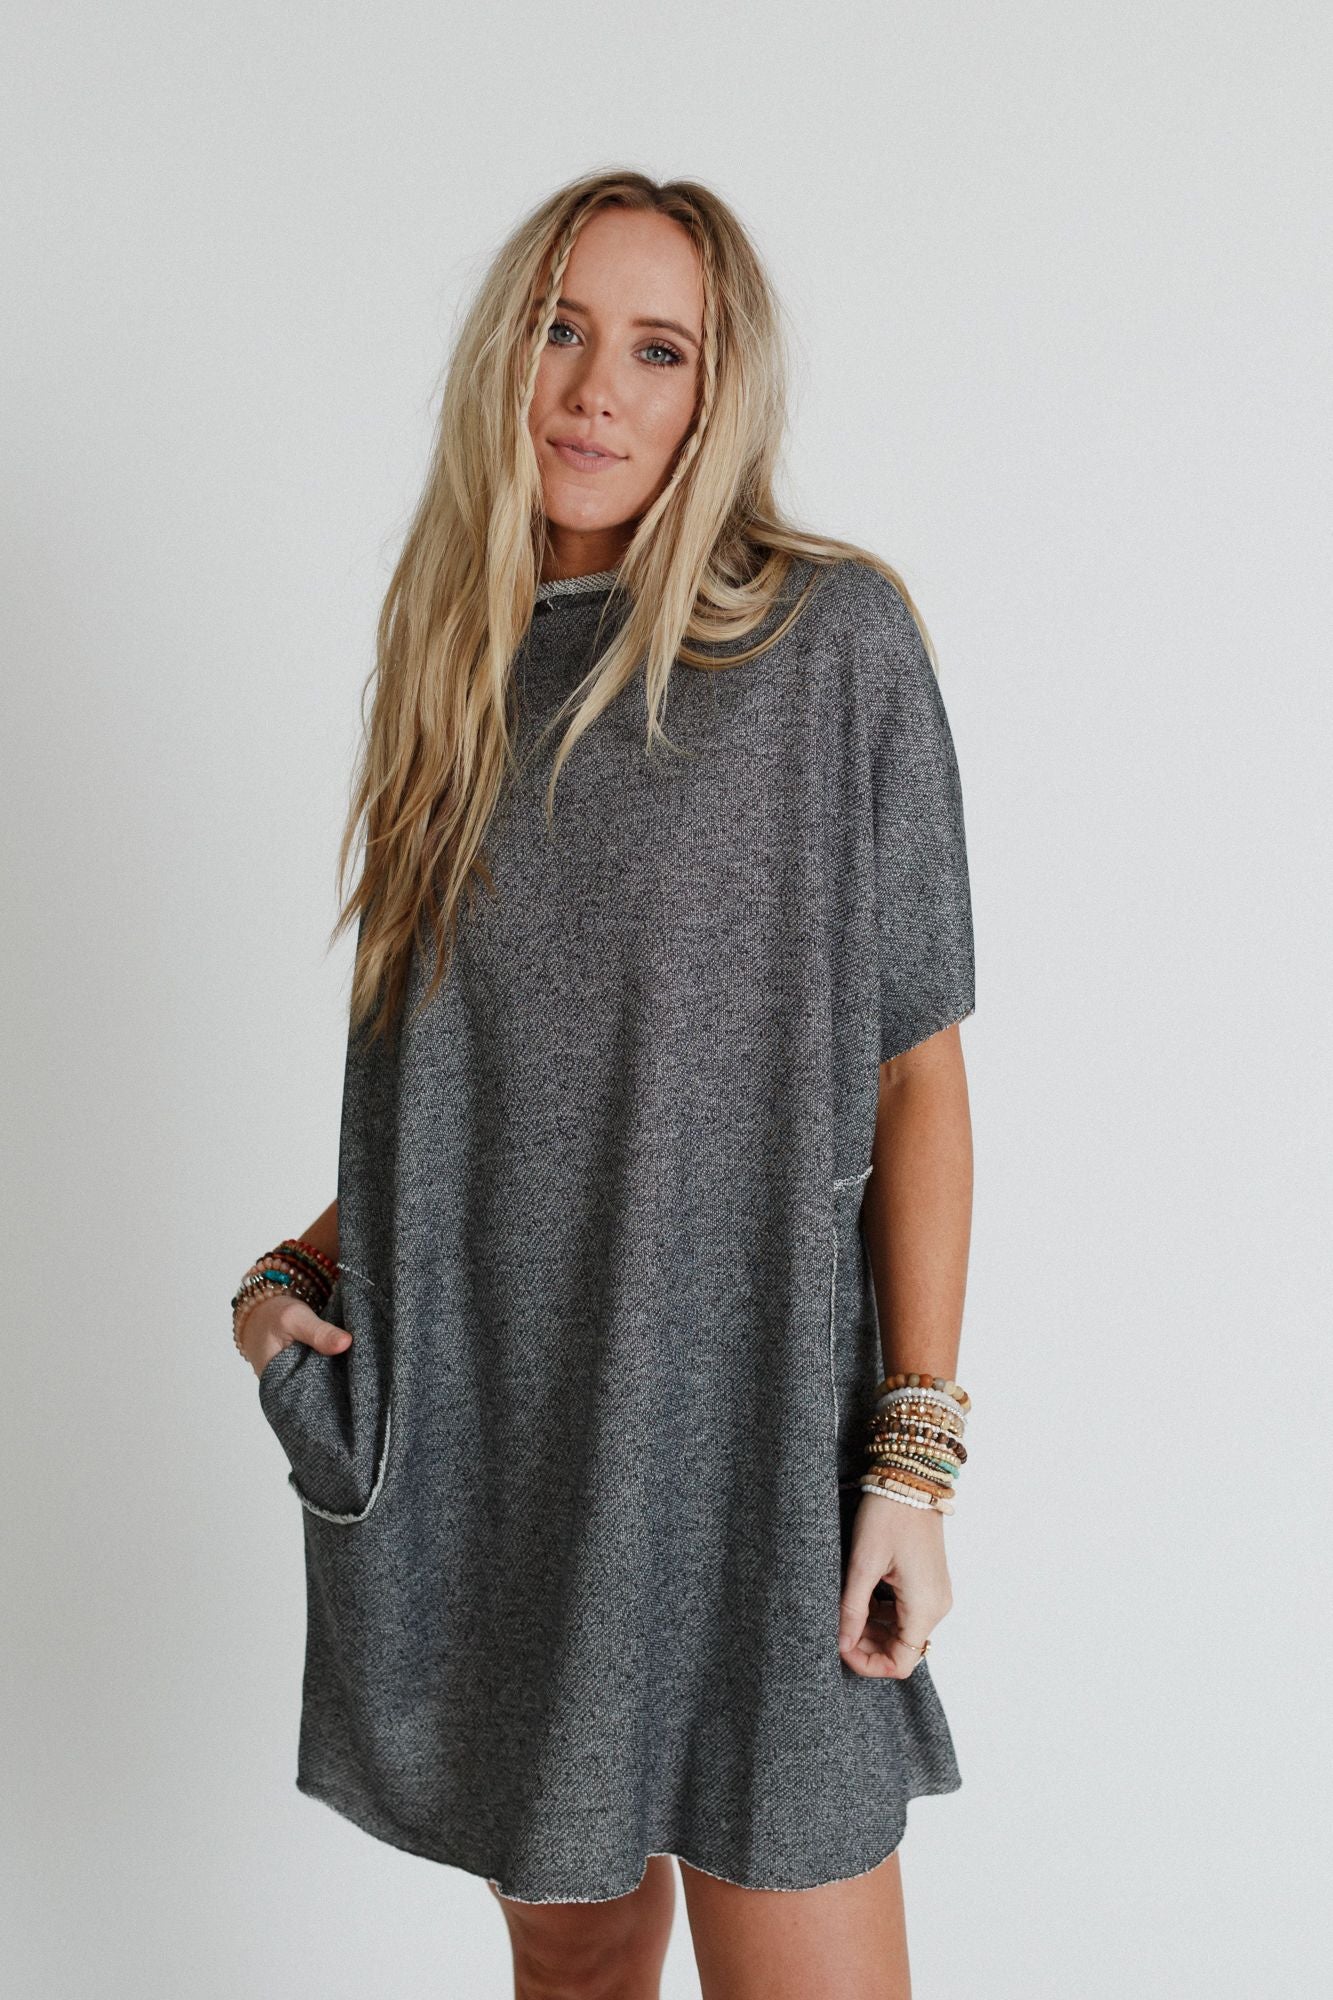 Laid Back Luxe Dress - Two Tone Black